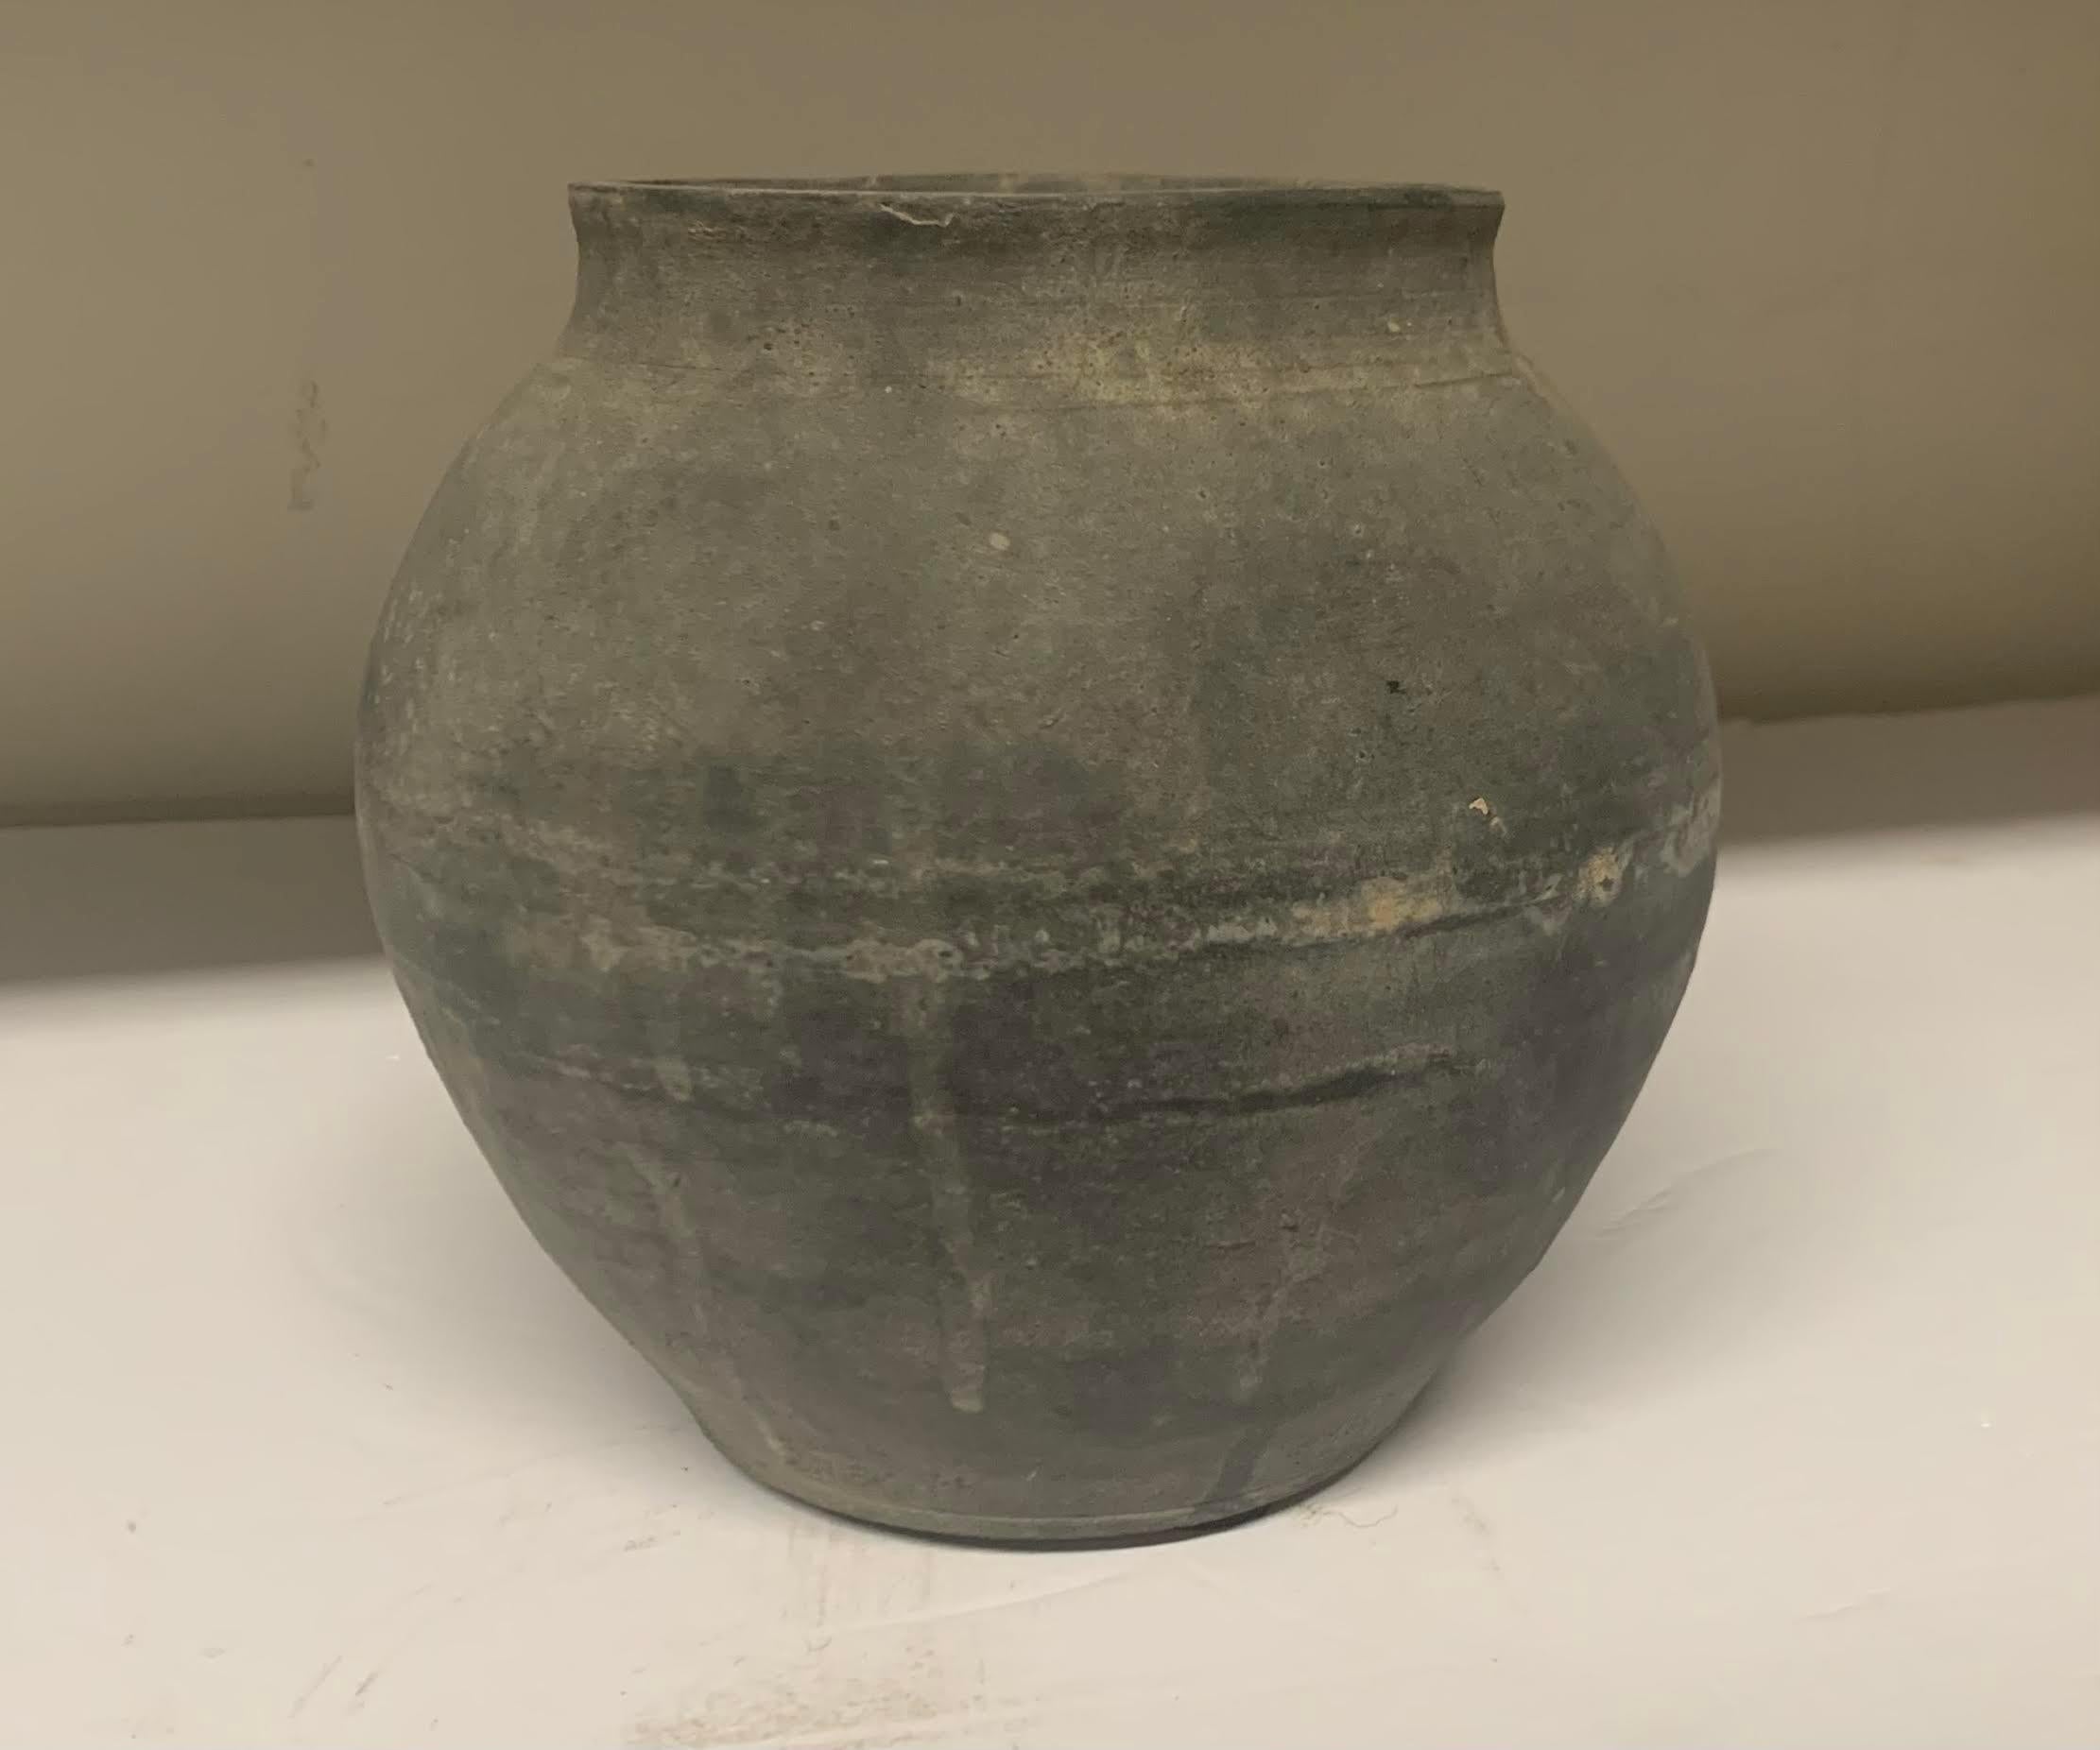 Late 20th century Chinese charcoal terracotta medium size food vessel.
An assortment of sizes and shapes are available and sold individually.
Each one is unique in its' weathered patina.
Sizes range from medium to extra extra large.
Measurements